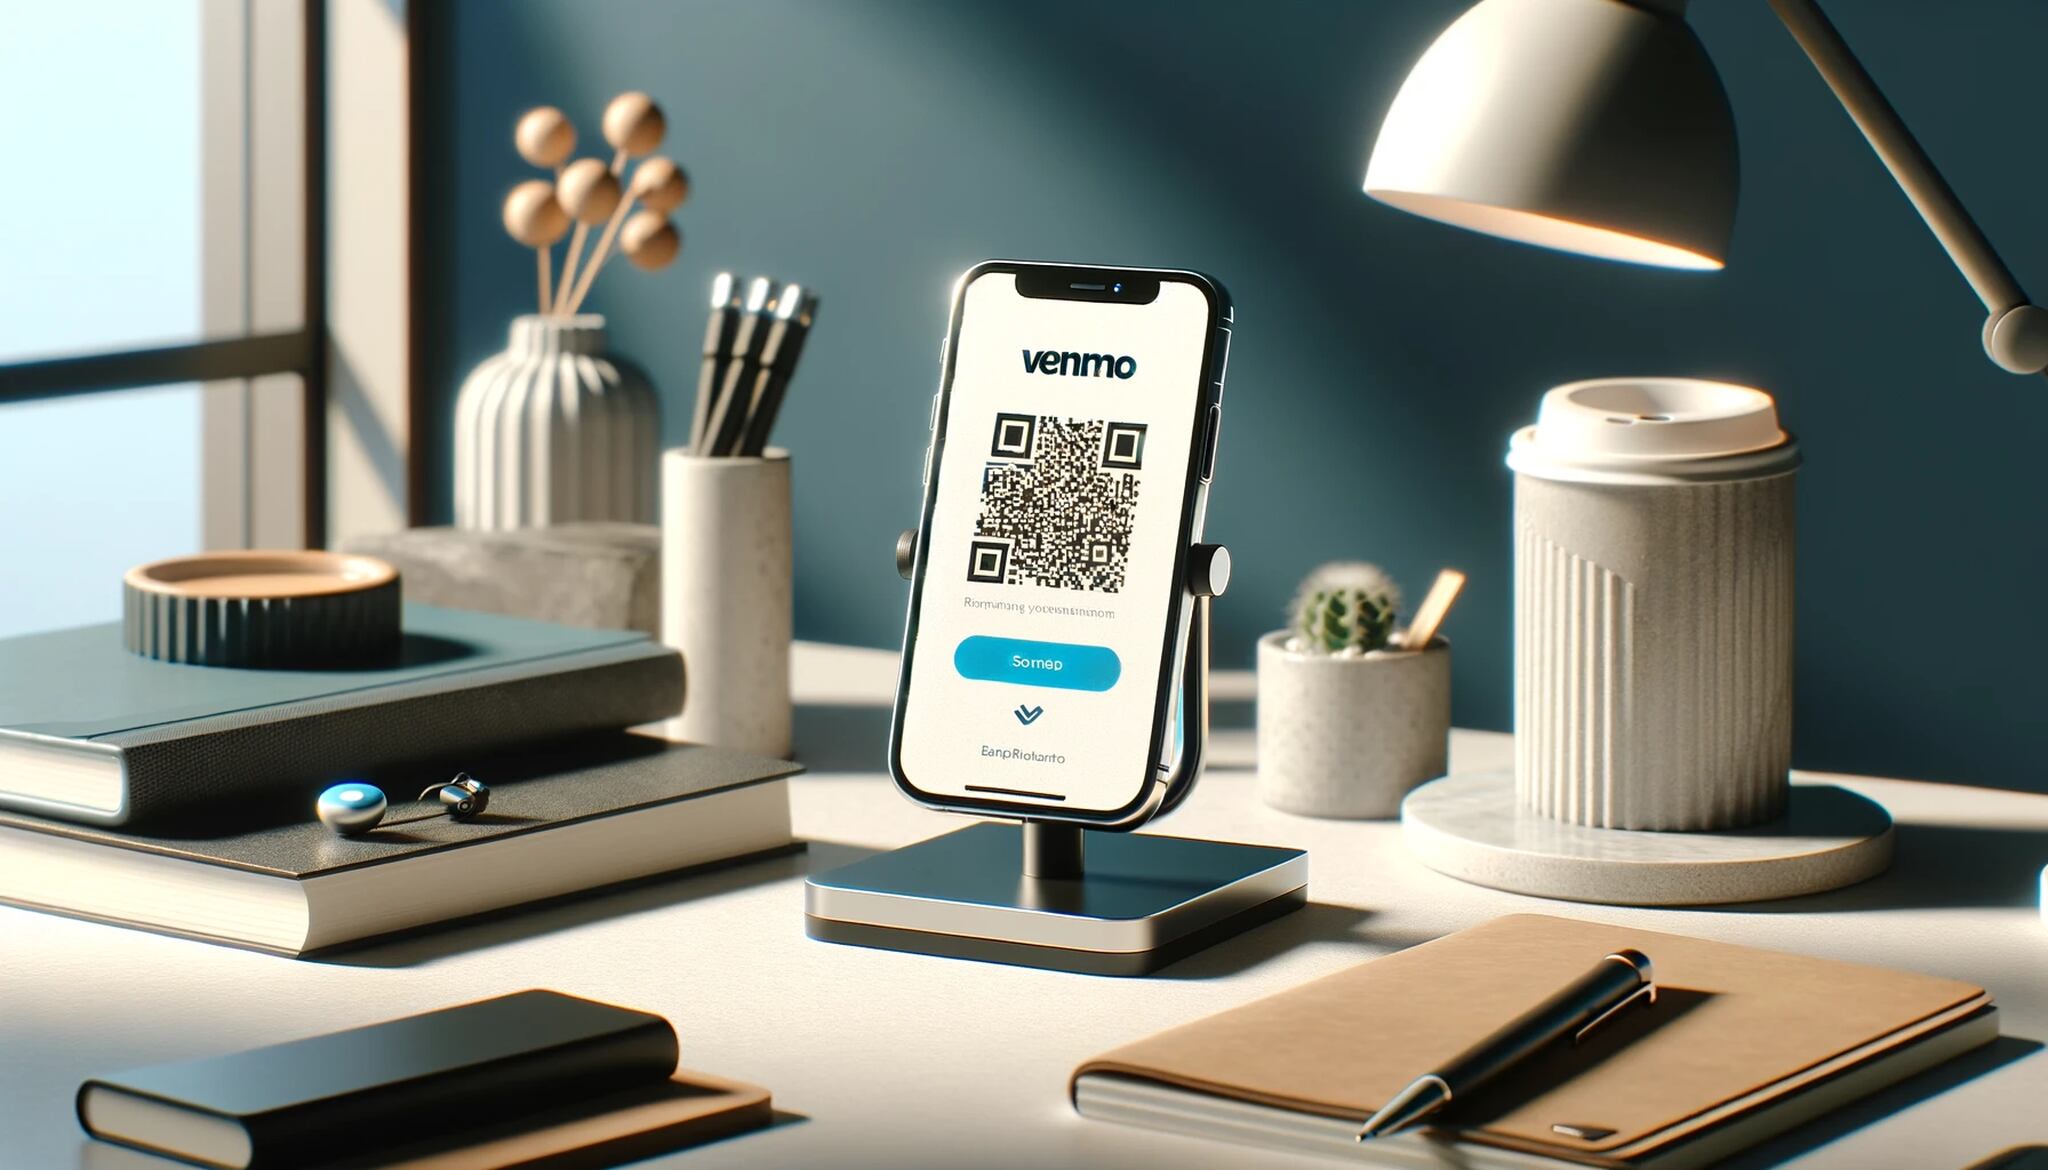 A smartphone resting on a minimalist stand and the screen displays a Venmo QR code